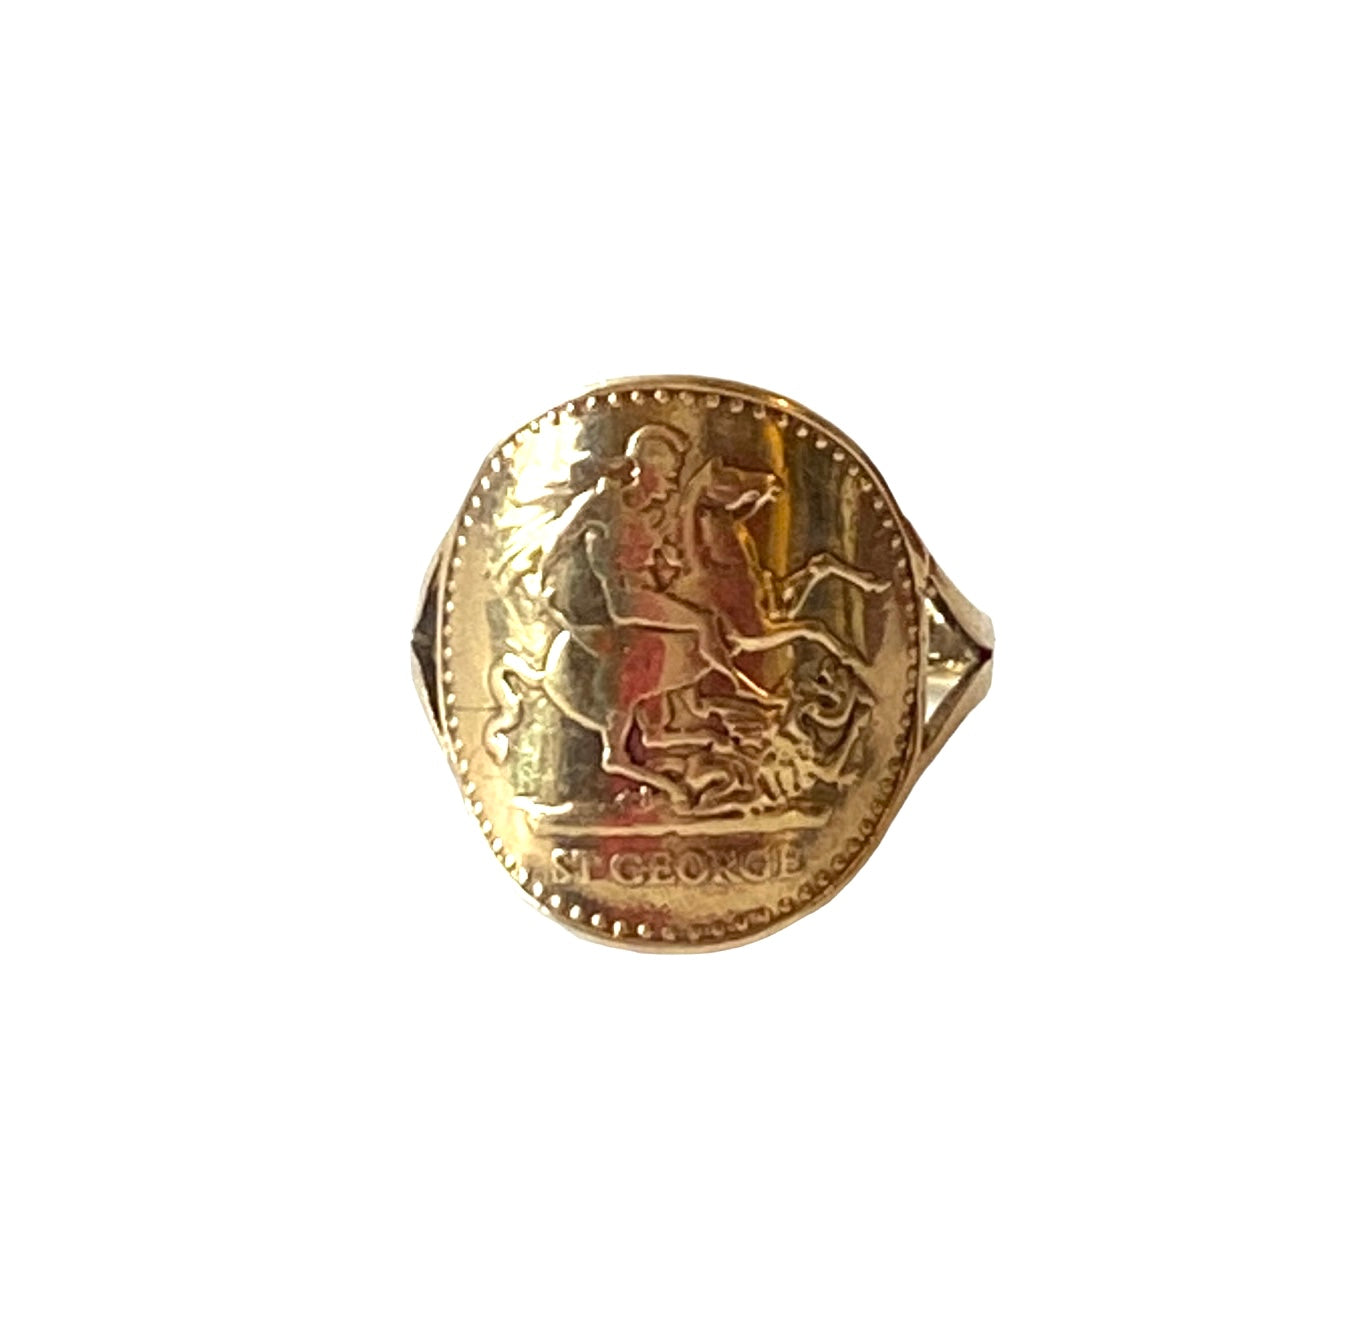 9ct vintage ring size T. St George on the front and krugerrand on the reverse